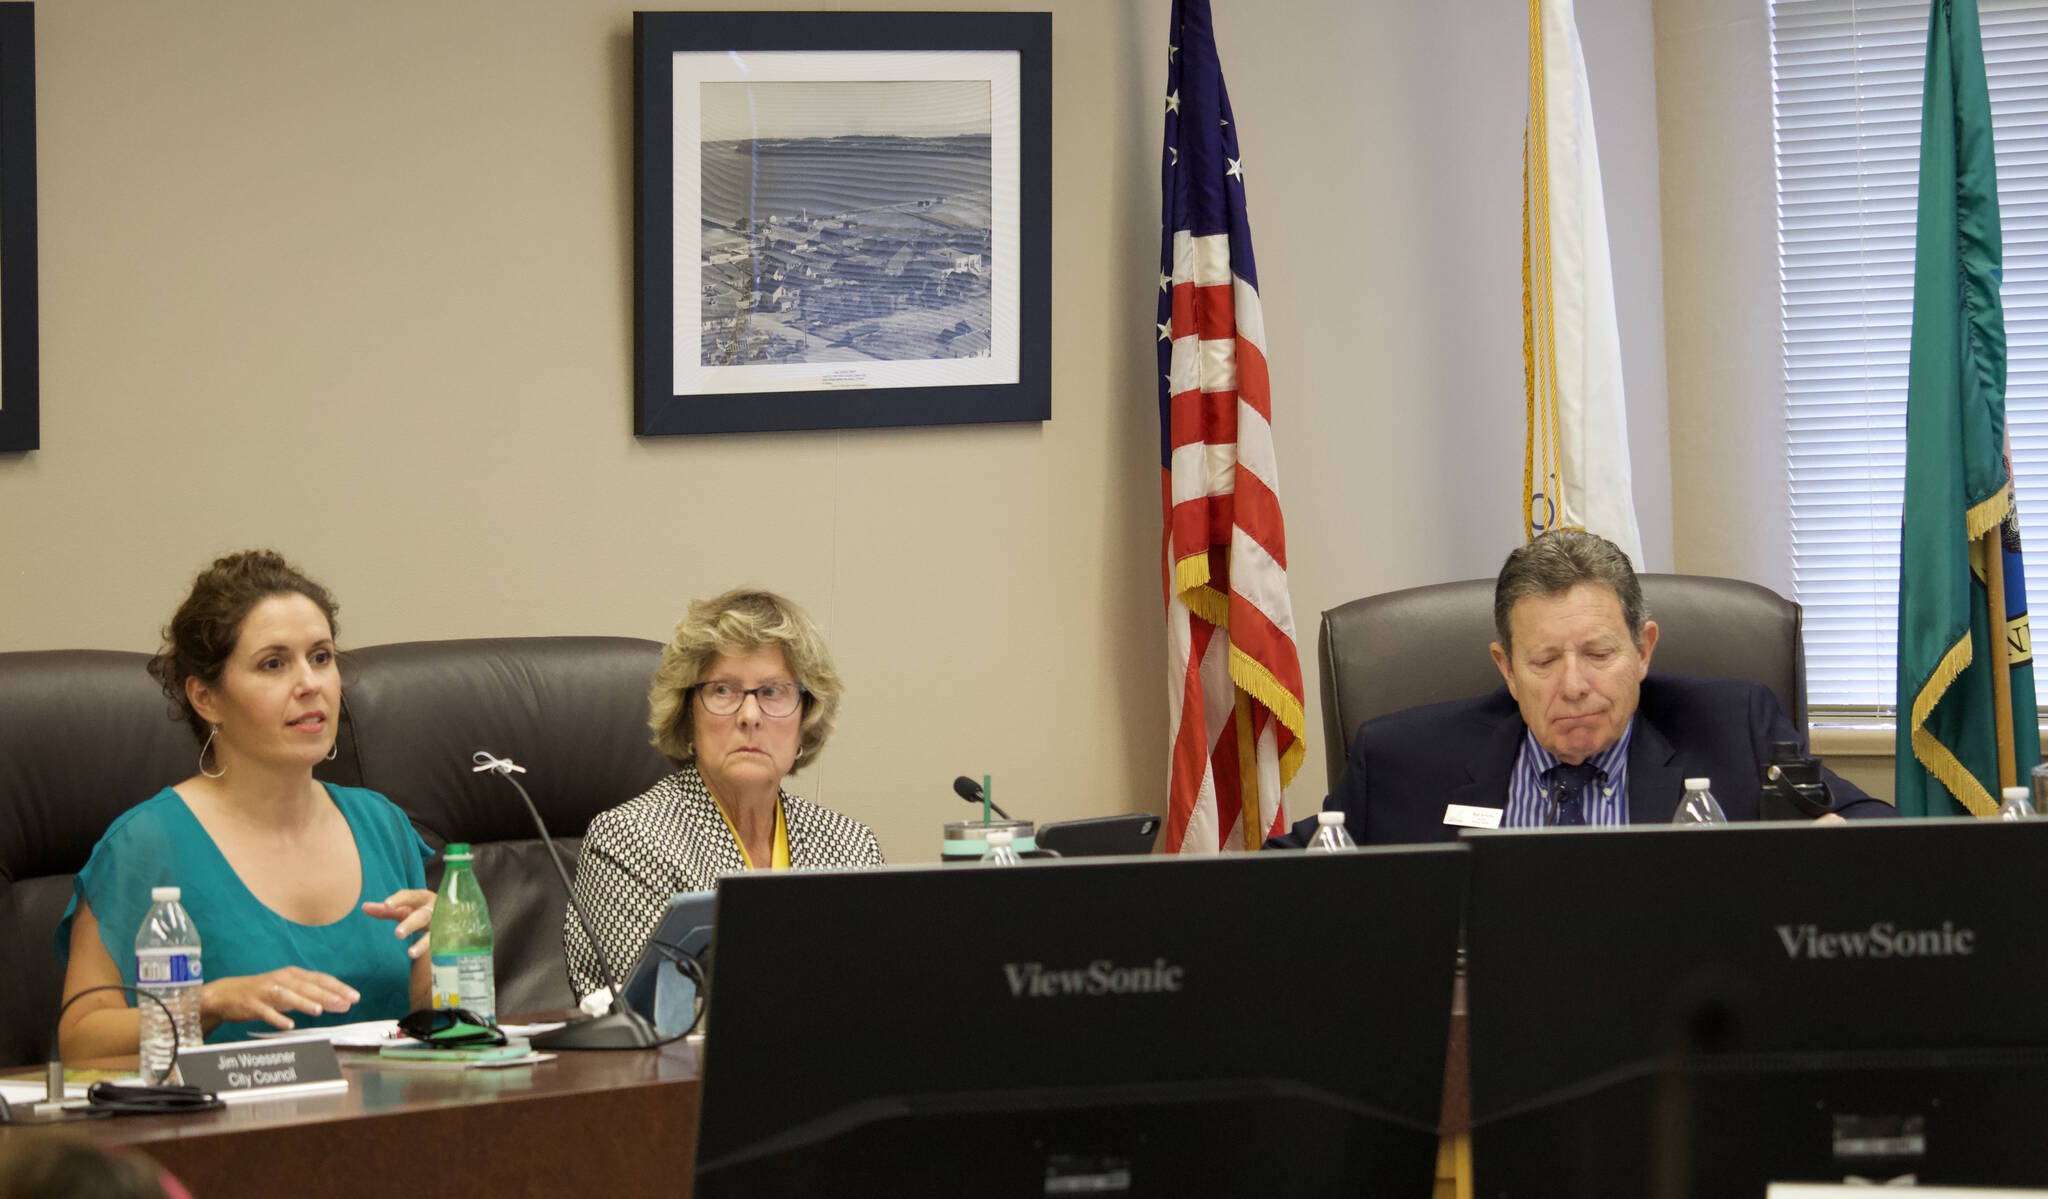 Tara Hizon, at left, was chosen to replace Munns as the mayor pro tem at Wednesday’s city council meeting. (Photo by Rachel Rosen/Whidbey News-Times)